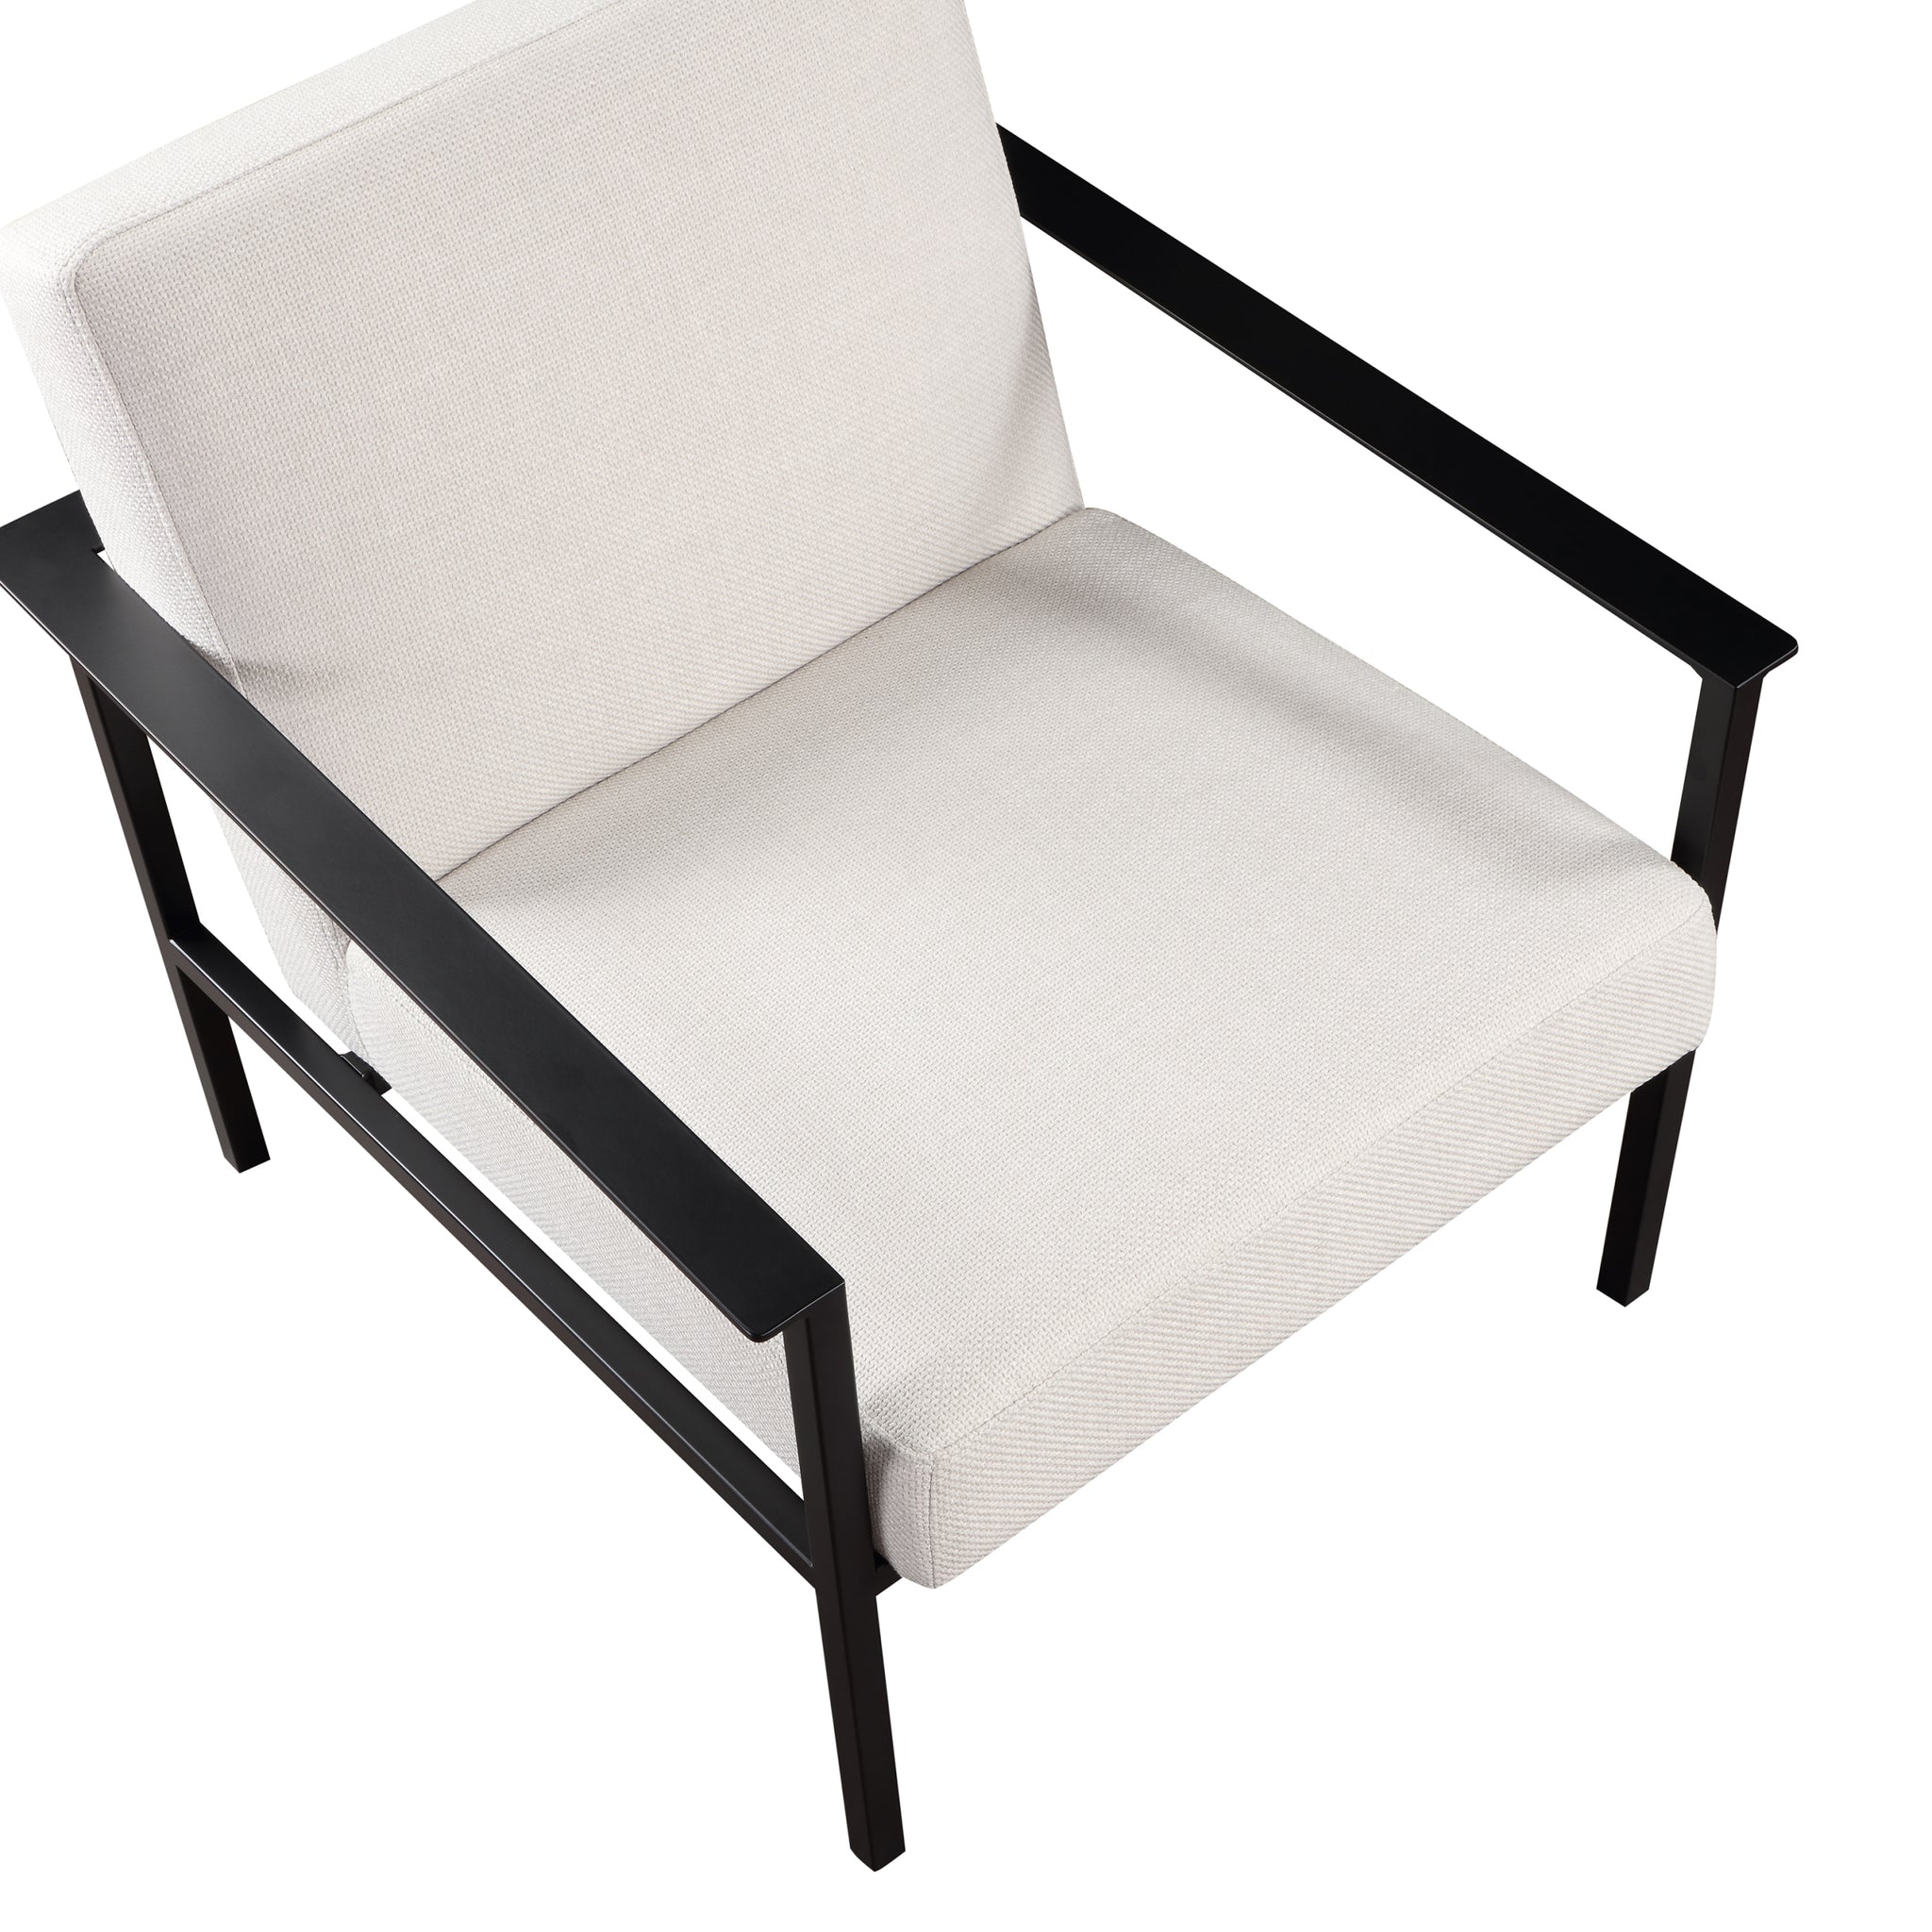 Millie Oatmeal White Stationary Metal Accent Chair off white-foam-polyester